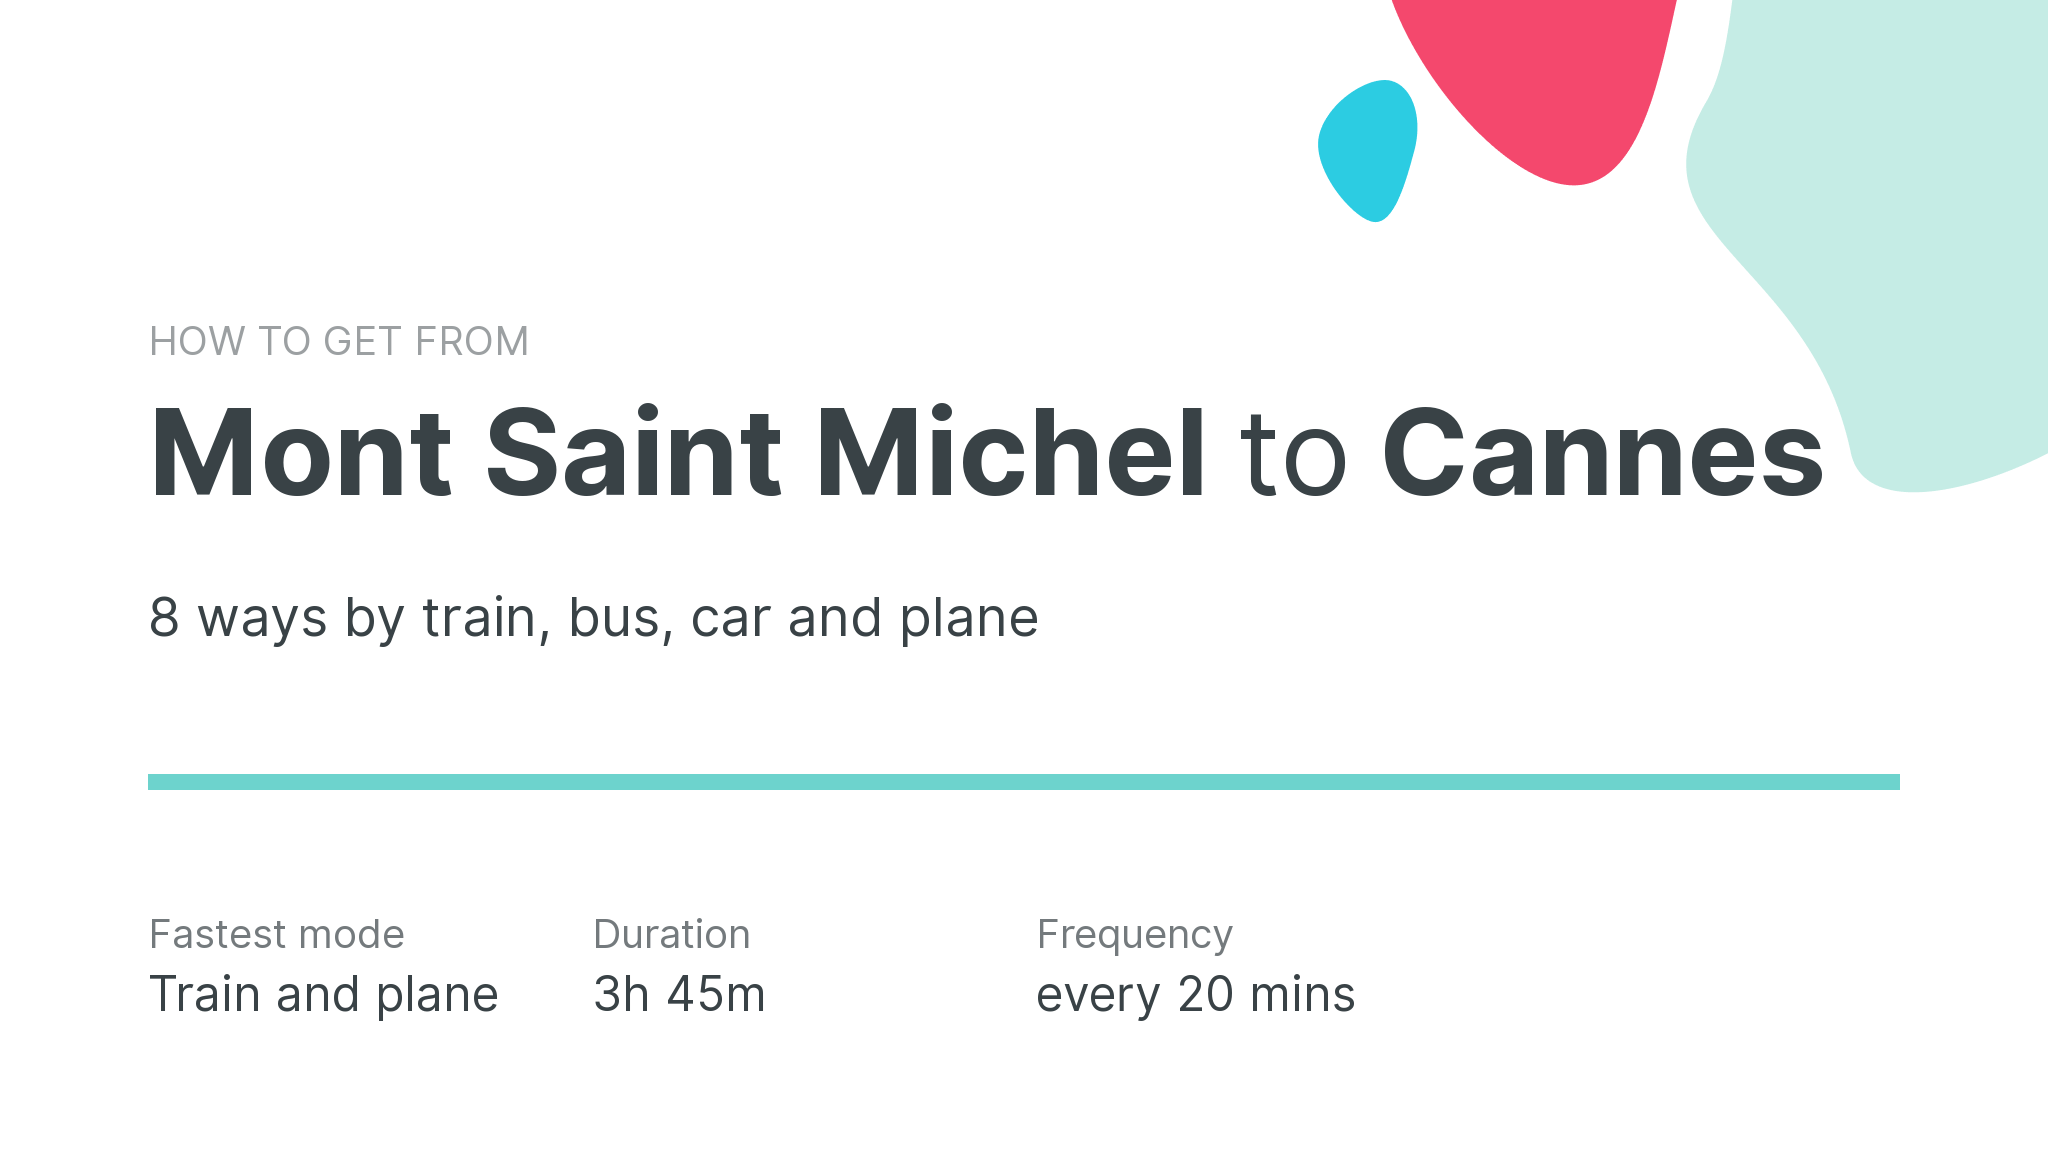 How do I get from Mont Saint Michel to Cannes